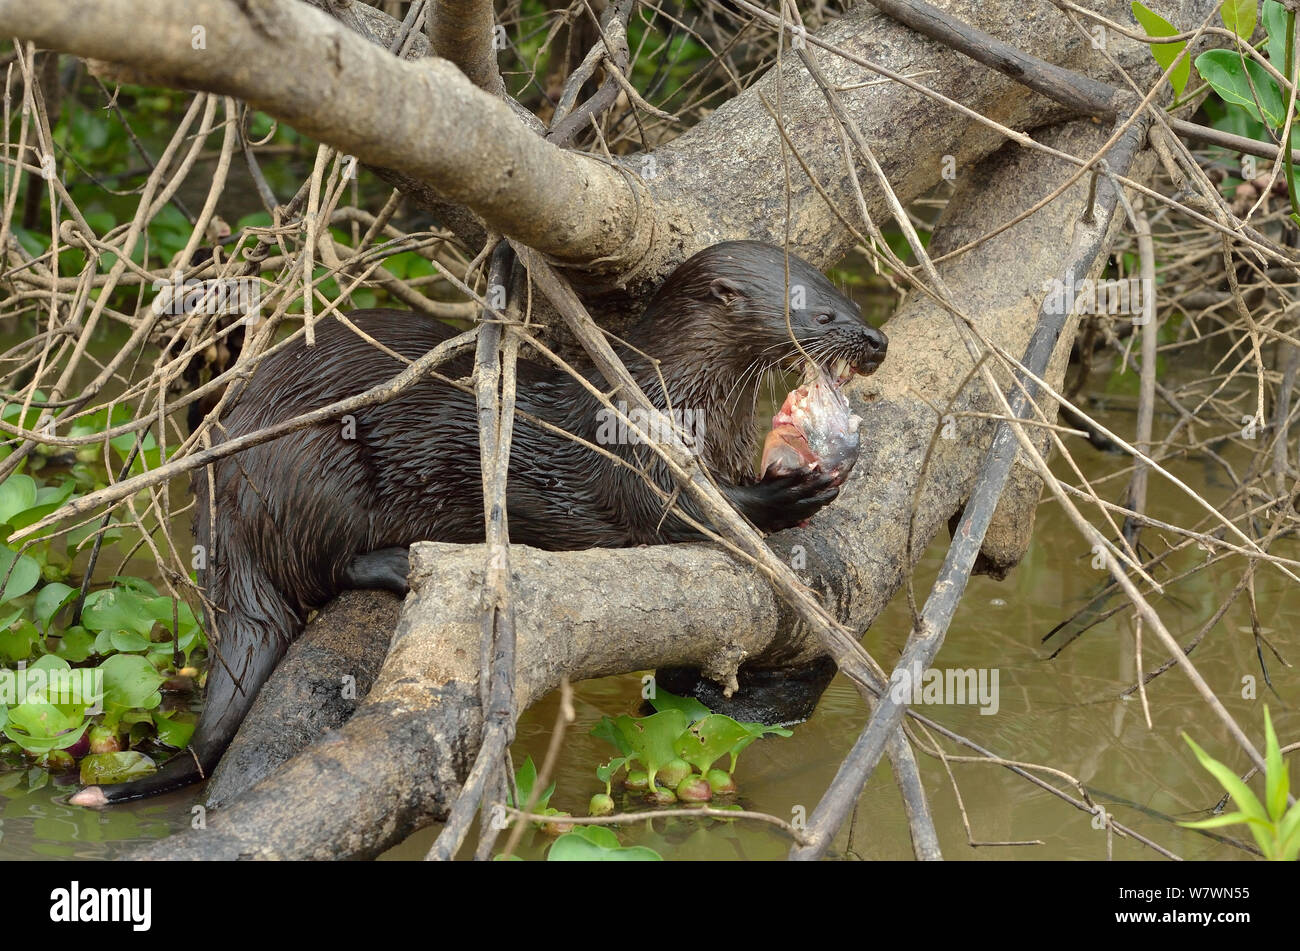 Neotropical river otter (Lontra longicaudis) eating a fish, Pantanal, Mato Grosso State, Western Brazil. Stock Photo